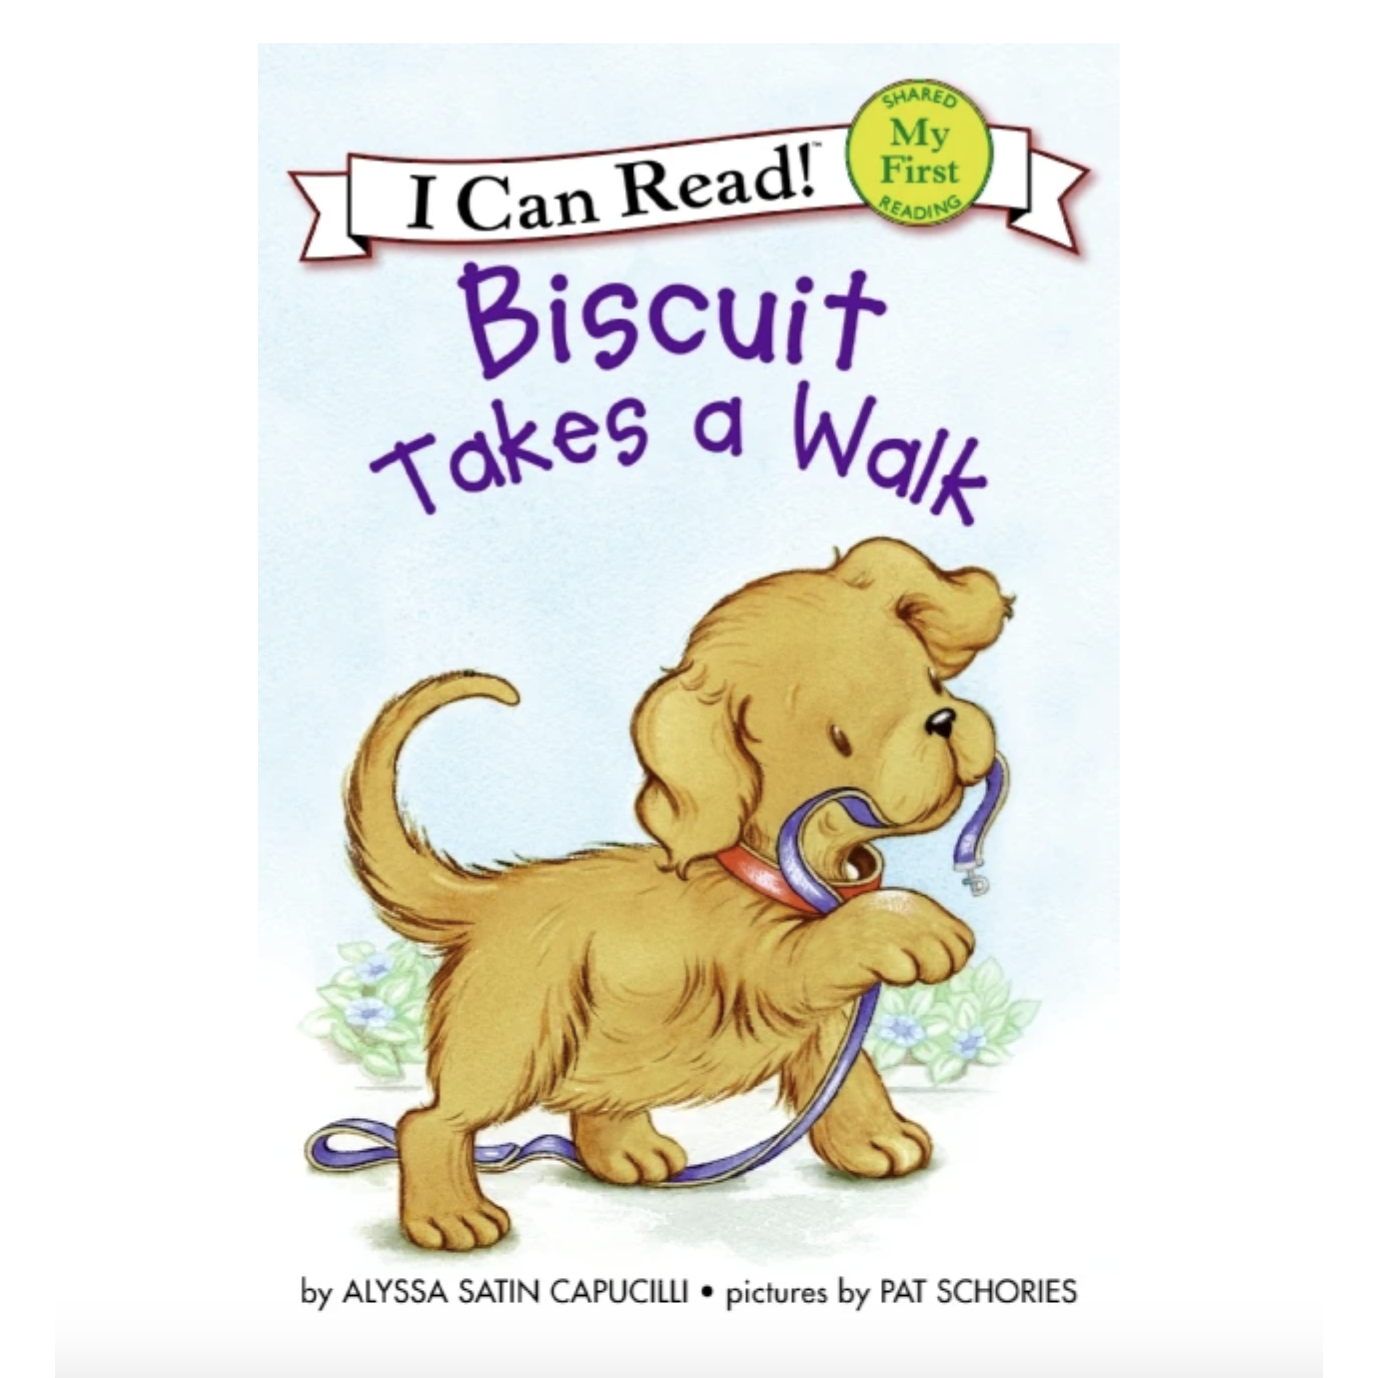 Harper Collins: My First I Can Read: Biscuit Takes a Walk-HARPER COLLINS PUBLISHERS-Little Giant Kidz